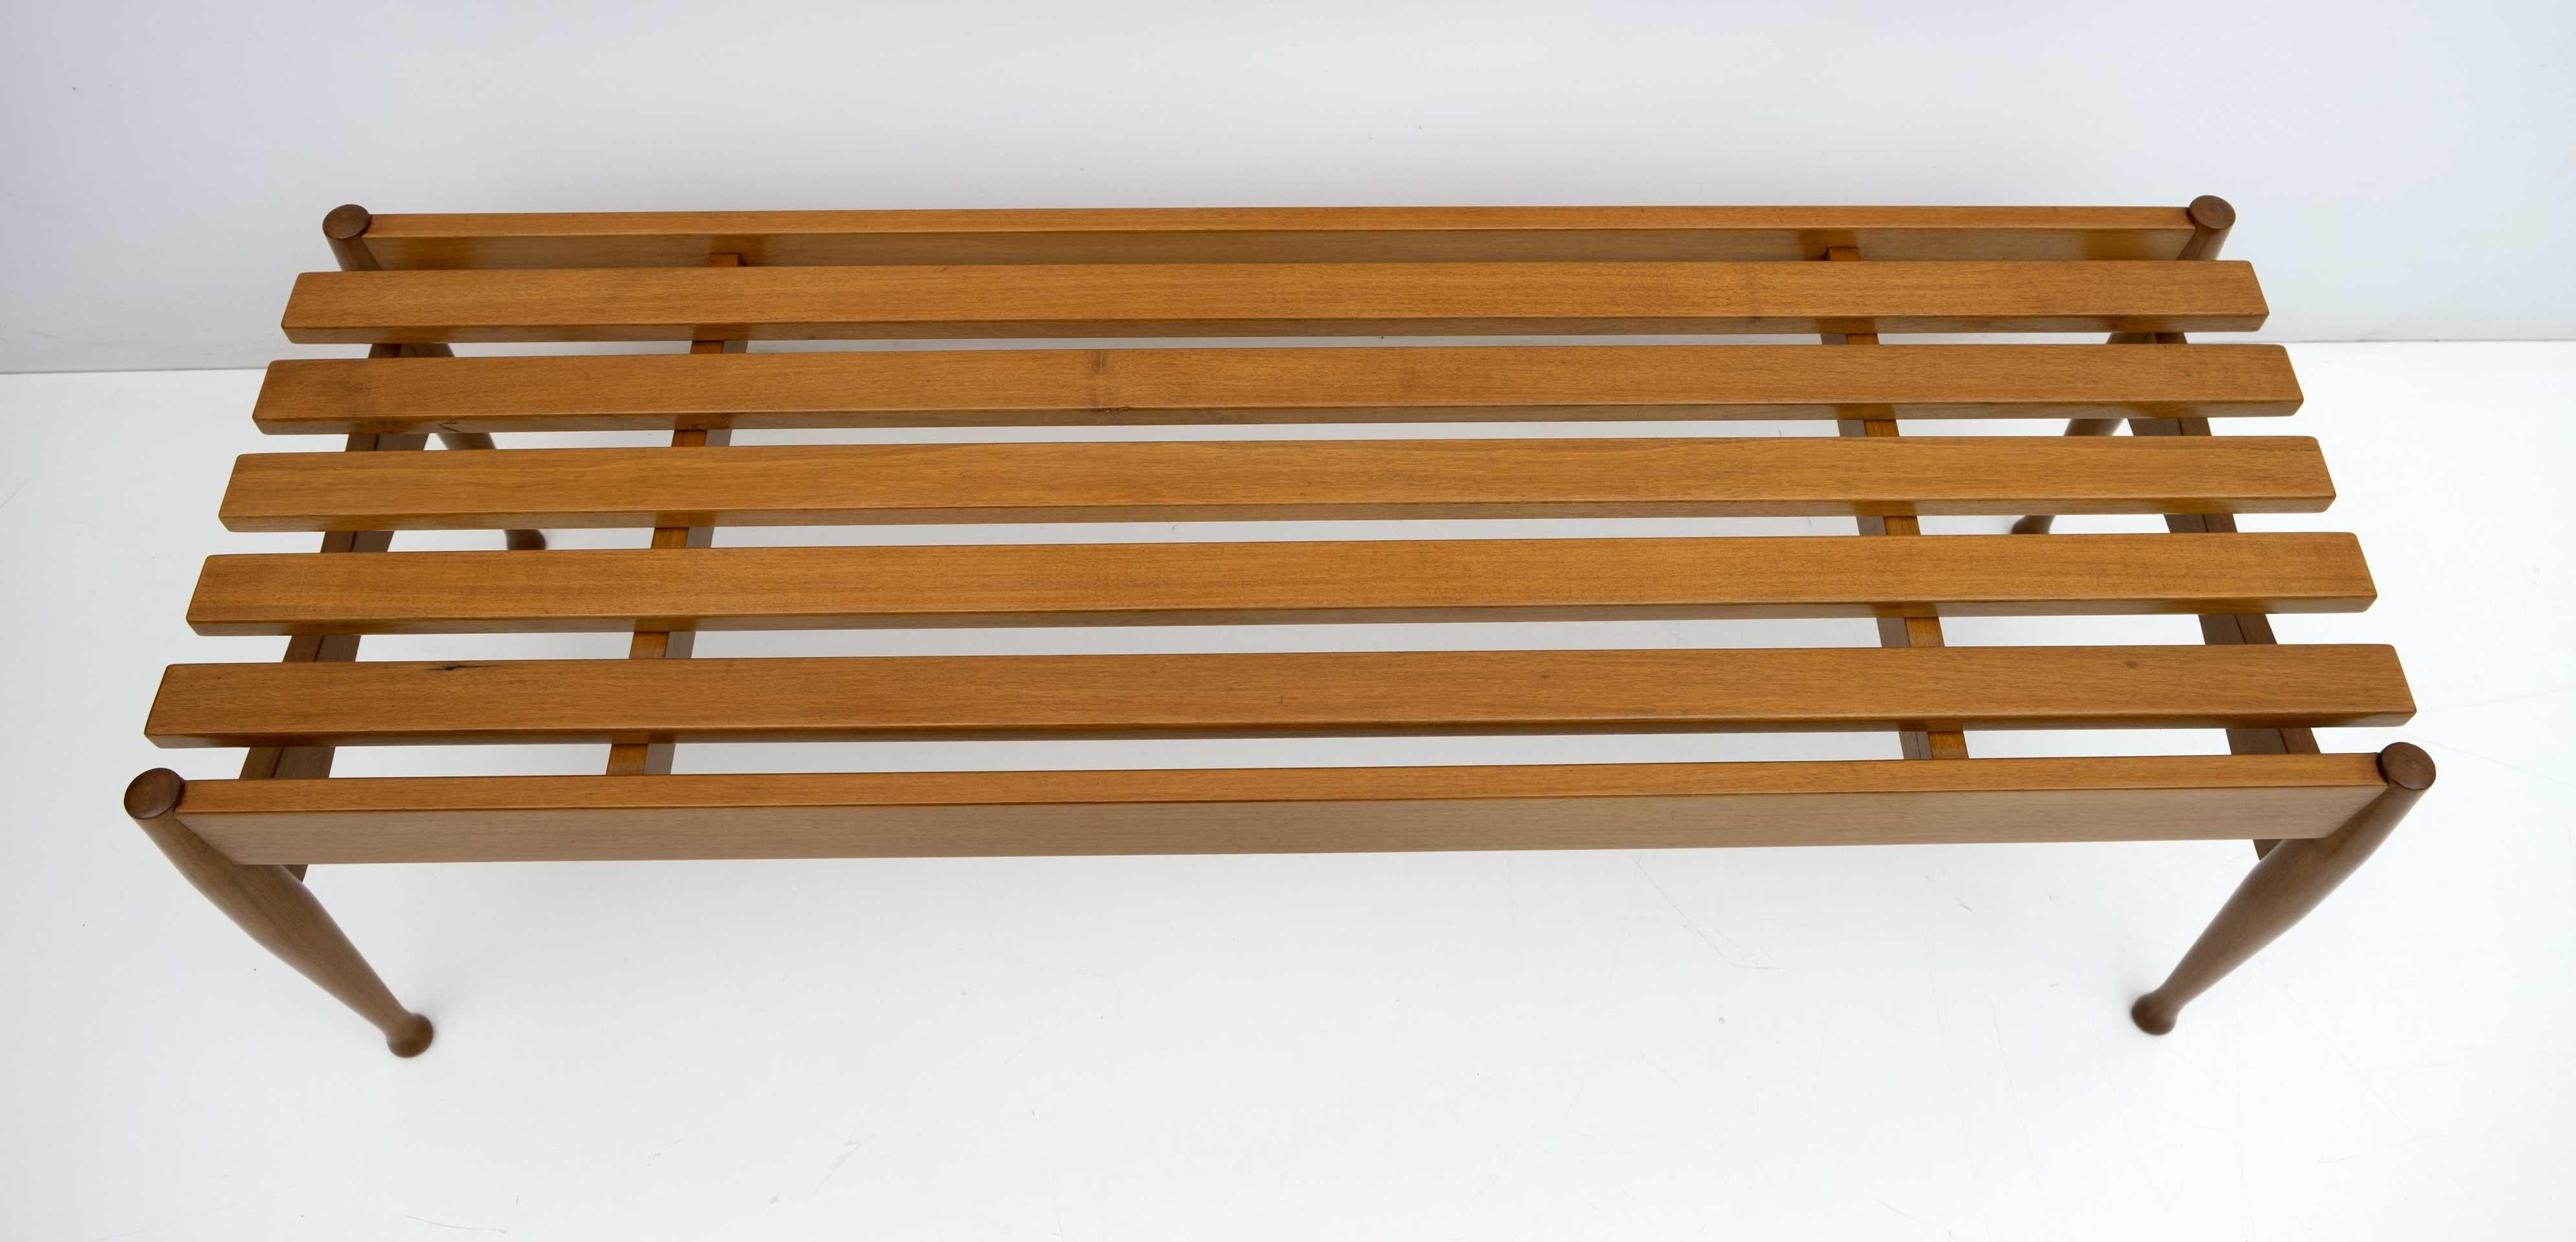 Walnut Attributed Giò Ponti Mid-century Modern Italian Bench for Fratelli Reguitti, 50s For Sale